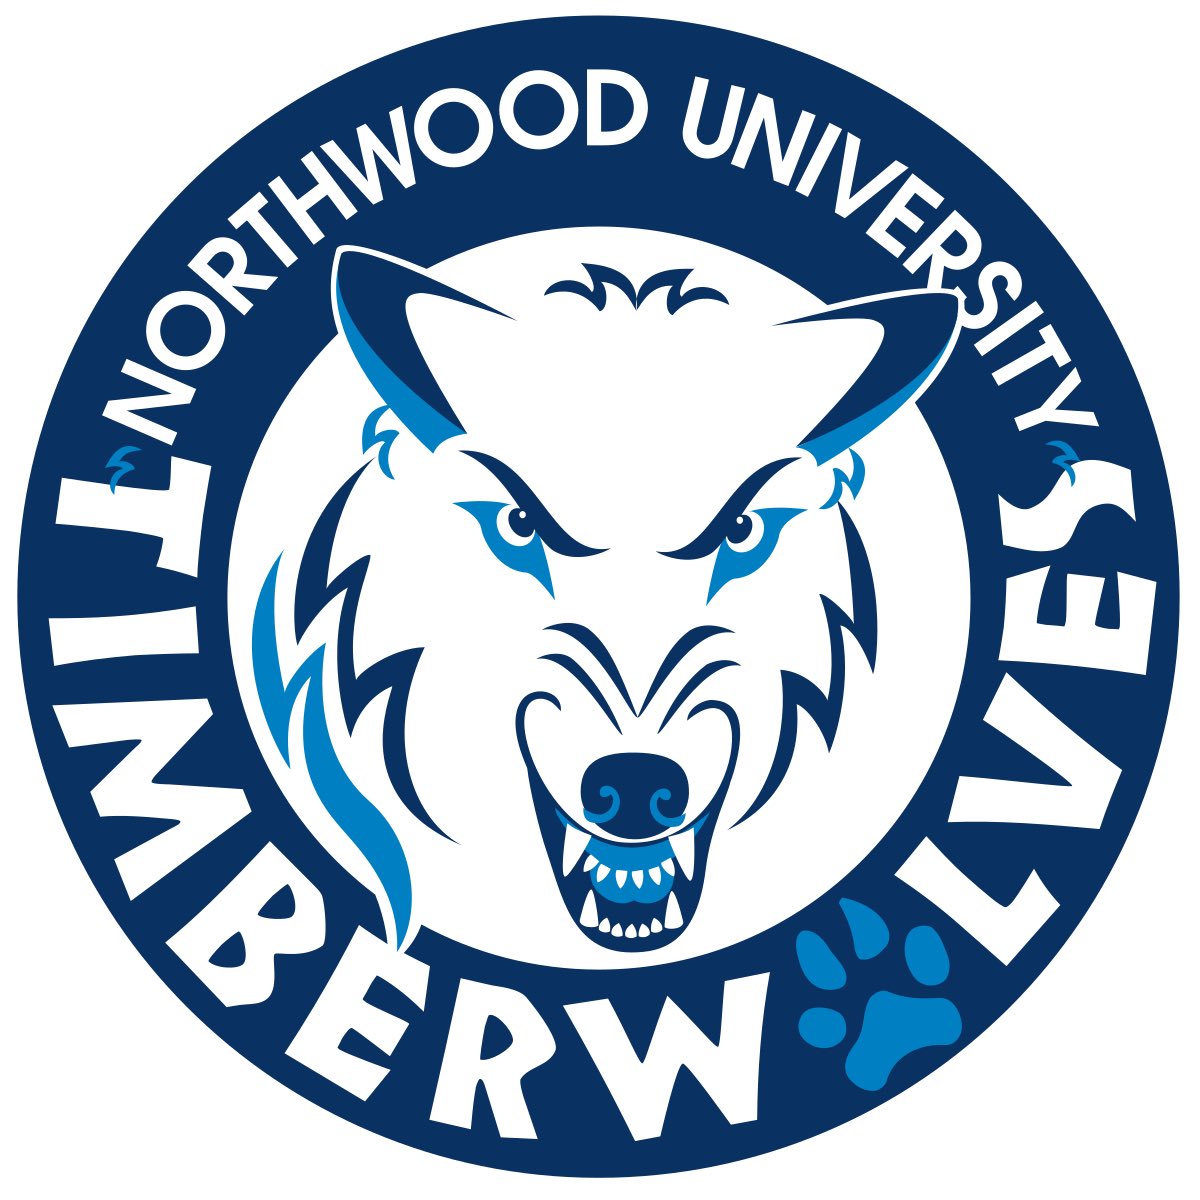 Im blessed to say I have received the opportunity to continue my academic and athletic careers at Northwood University. @gombos_mike @HankampScott @Top1Perform17u @KevinMoses38